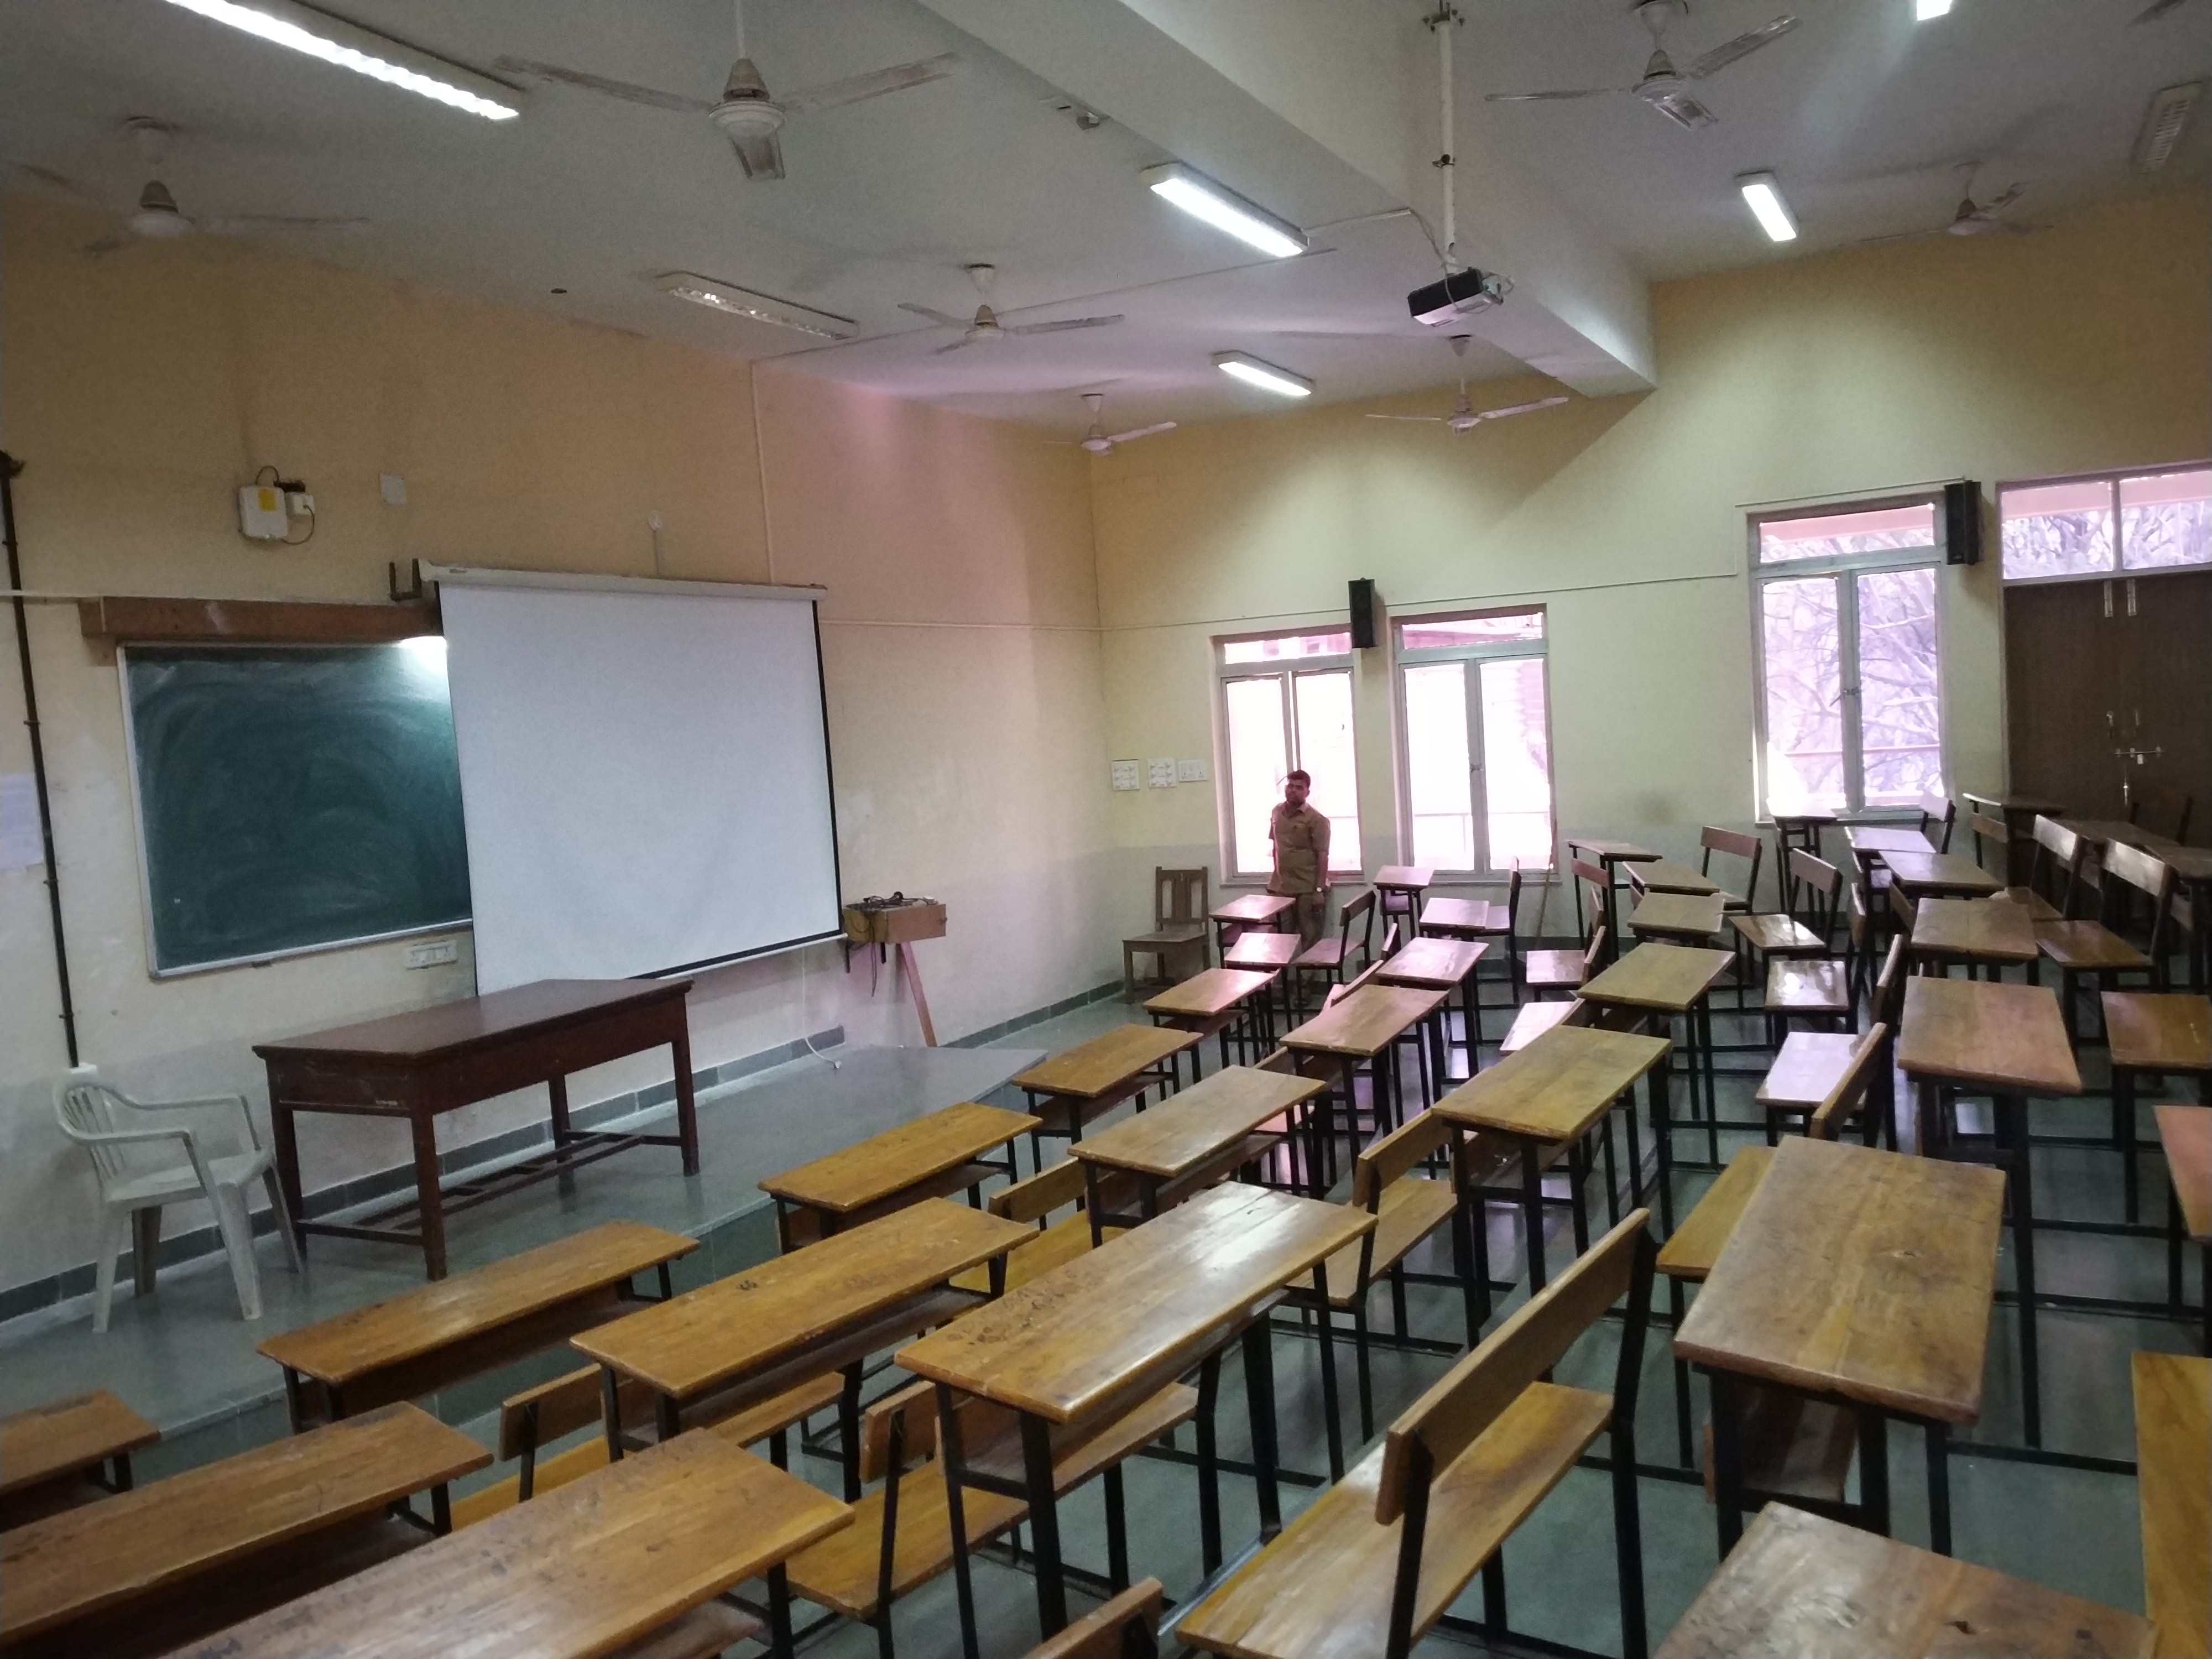 ICT enabled Hall No. 13